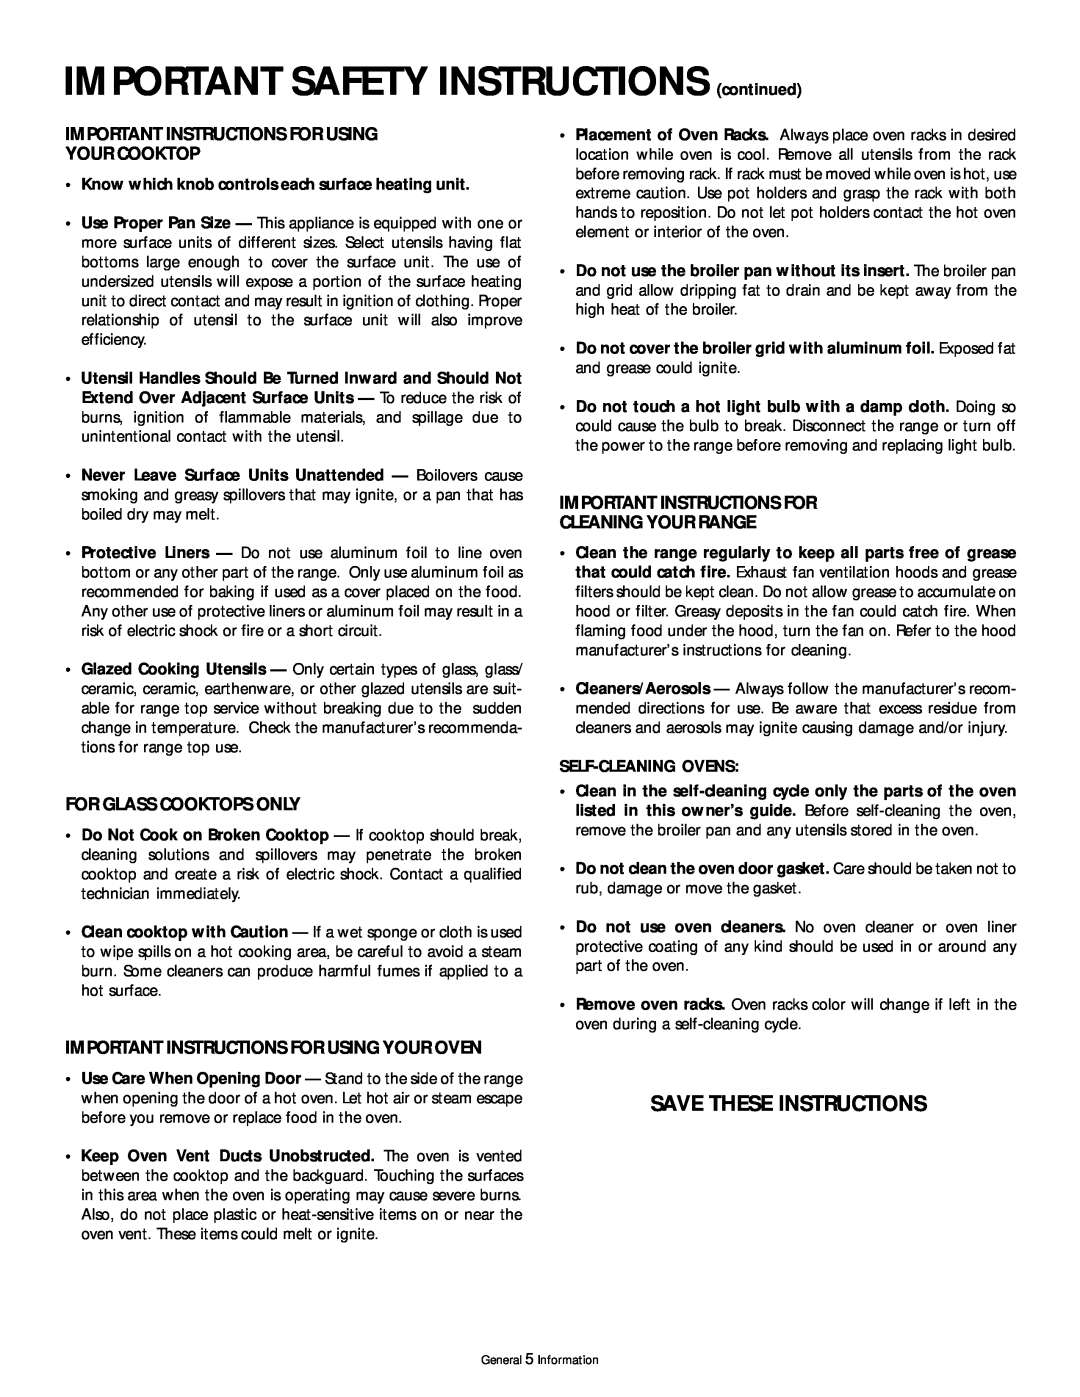 Frigidaire 318200407 manual Save These Instructions, Important Instructions For Using Your Cooktop, For Glass Cooktops Only 